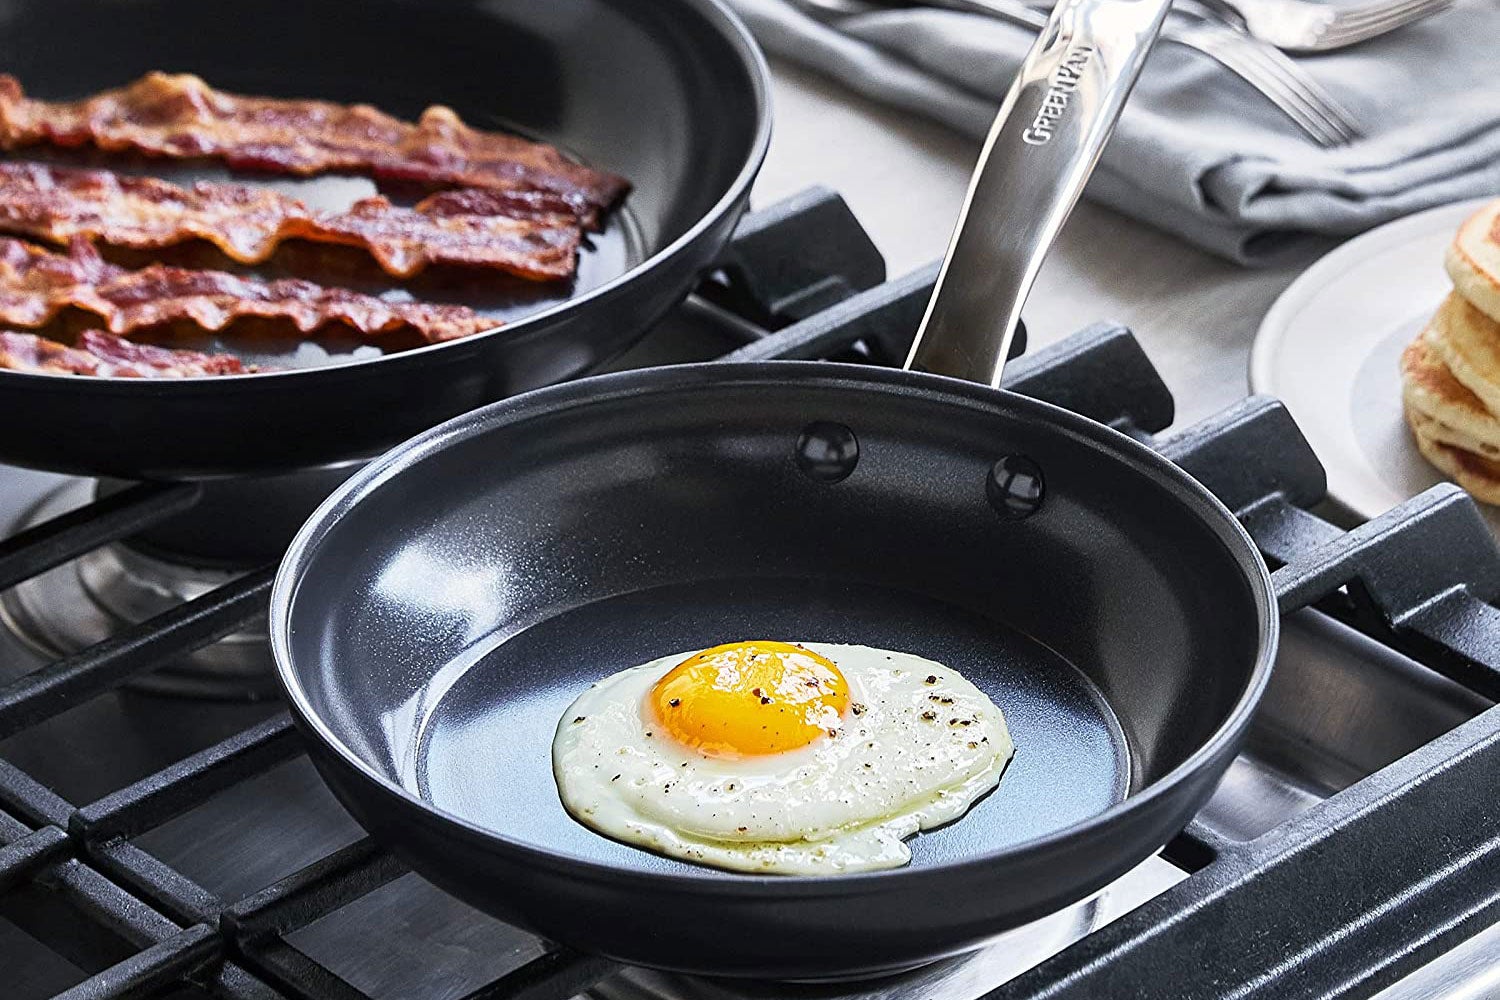 has slashed 34% off 'the best' 14-piece cookware set for Prime Day